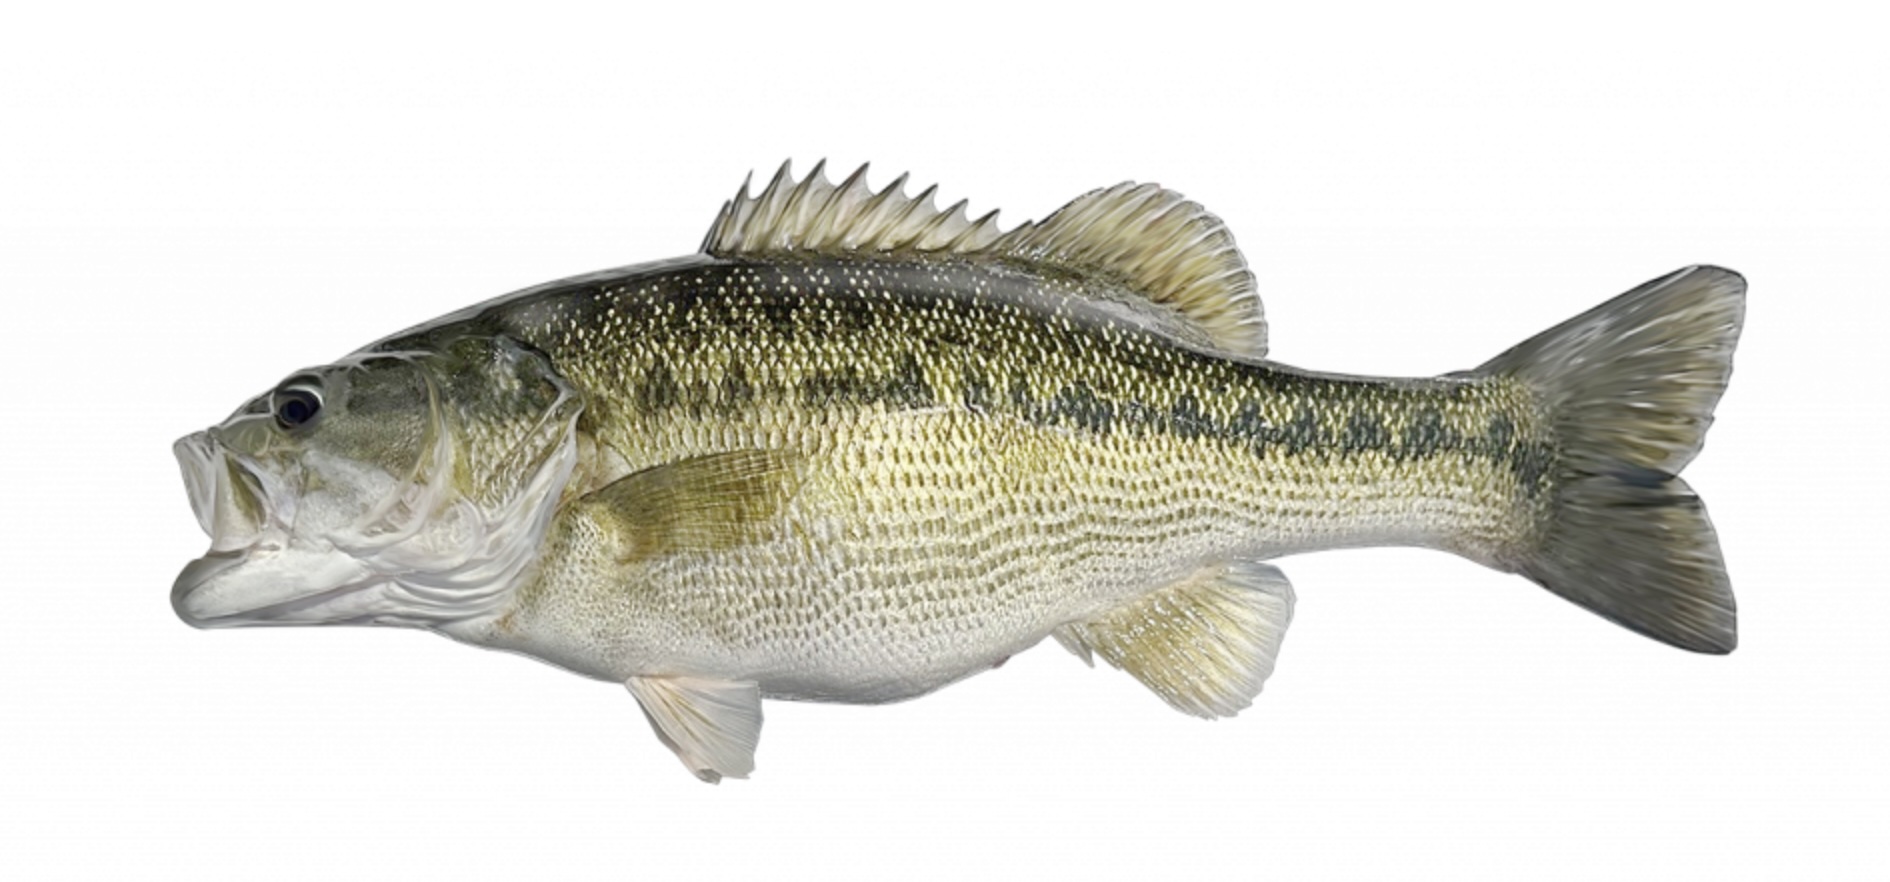 Alabama bass are not spotted bass.